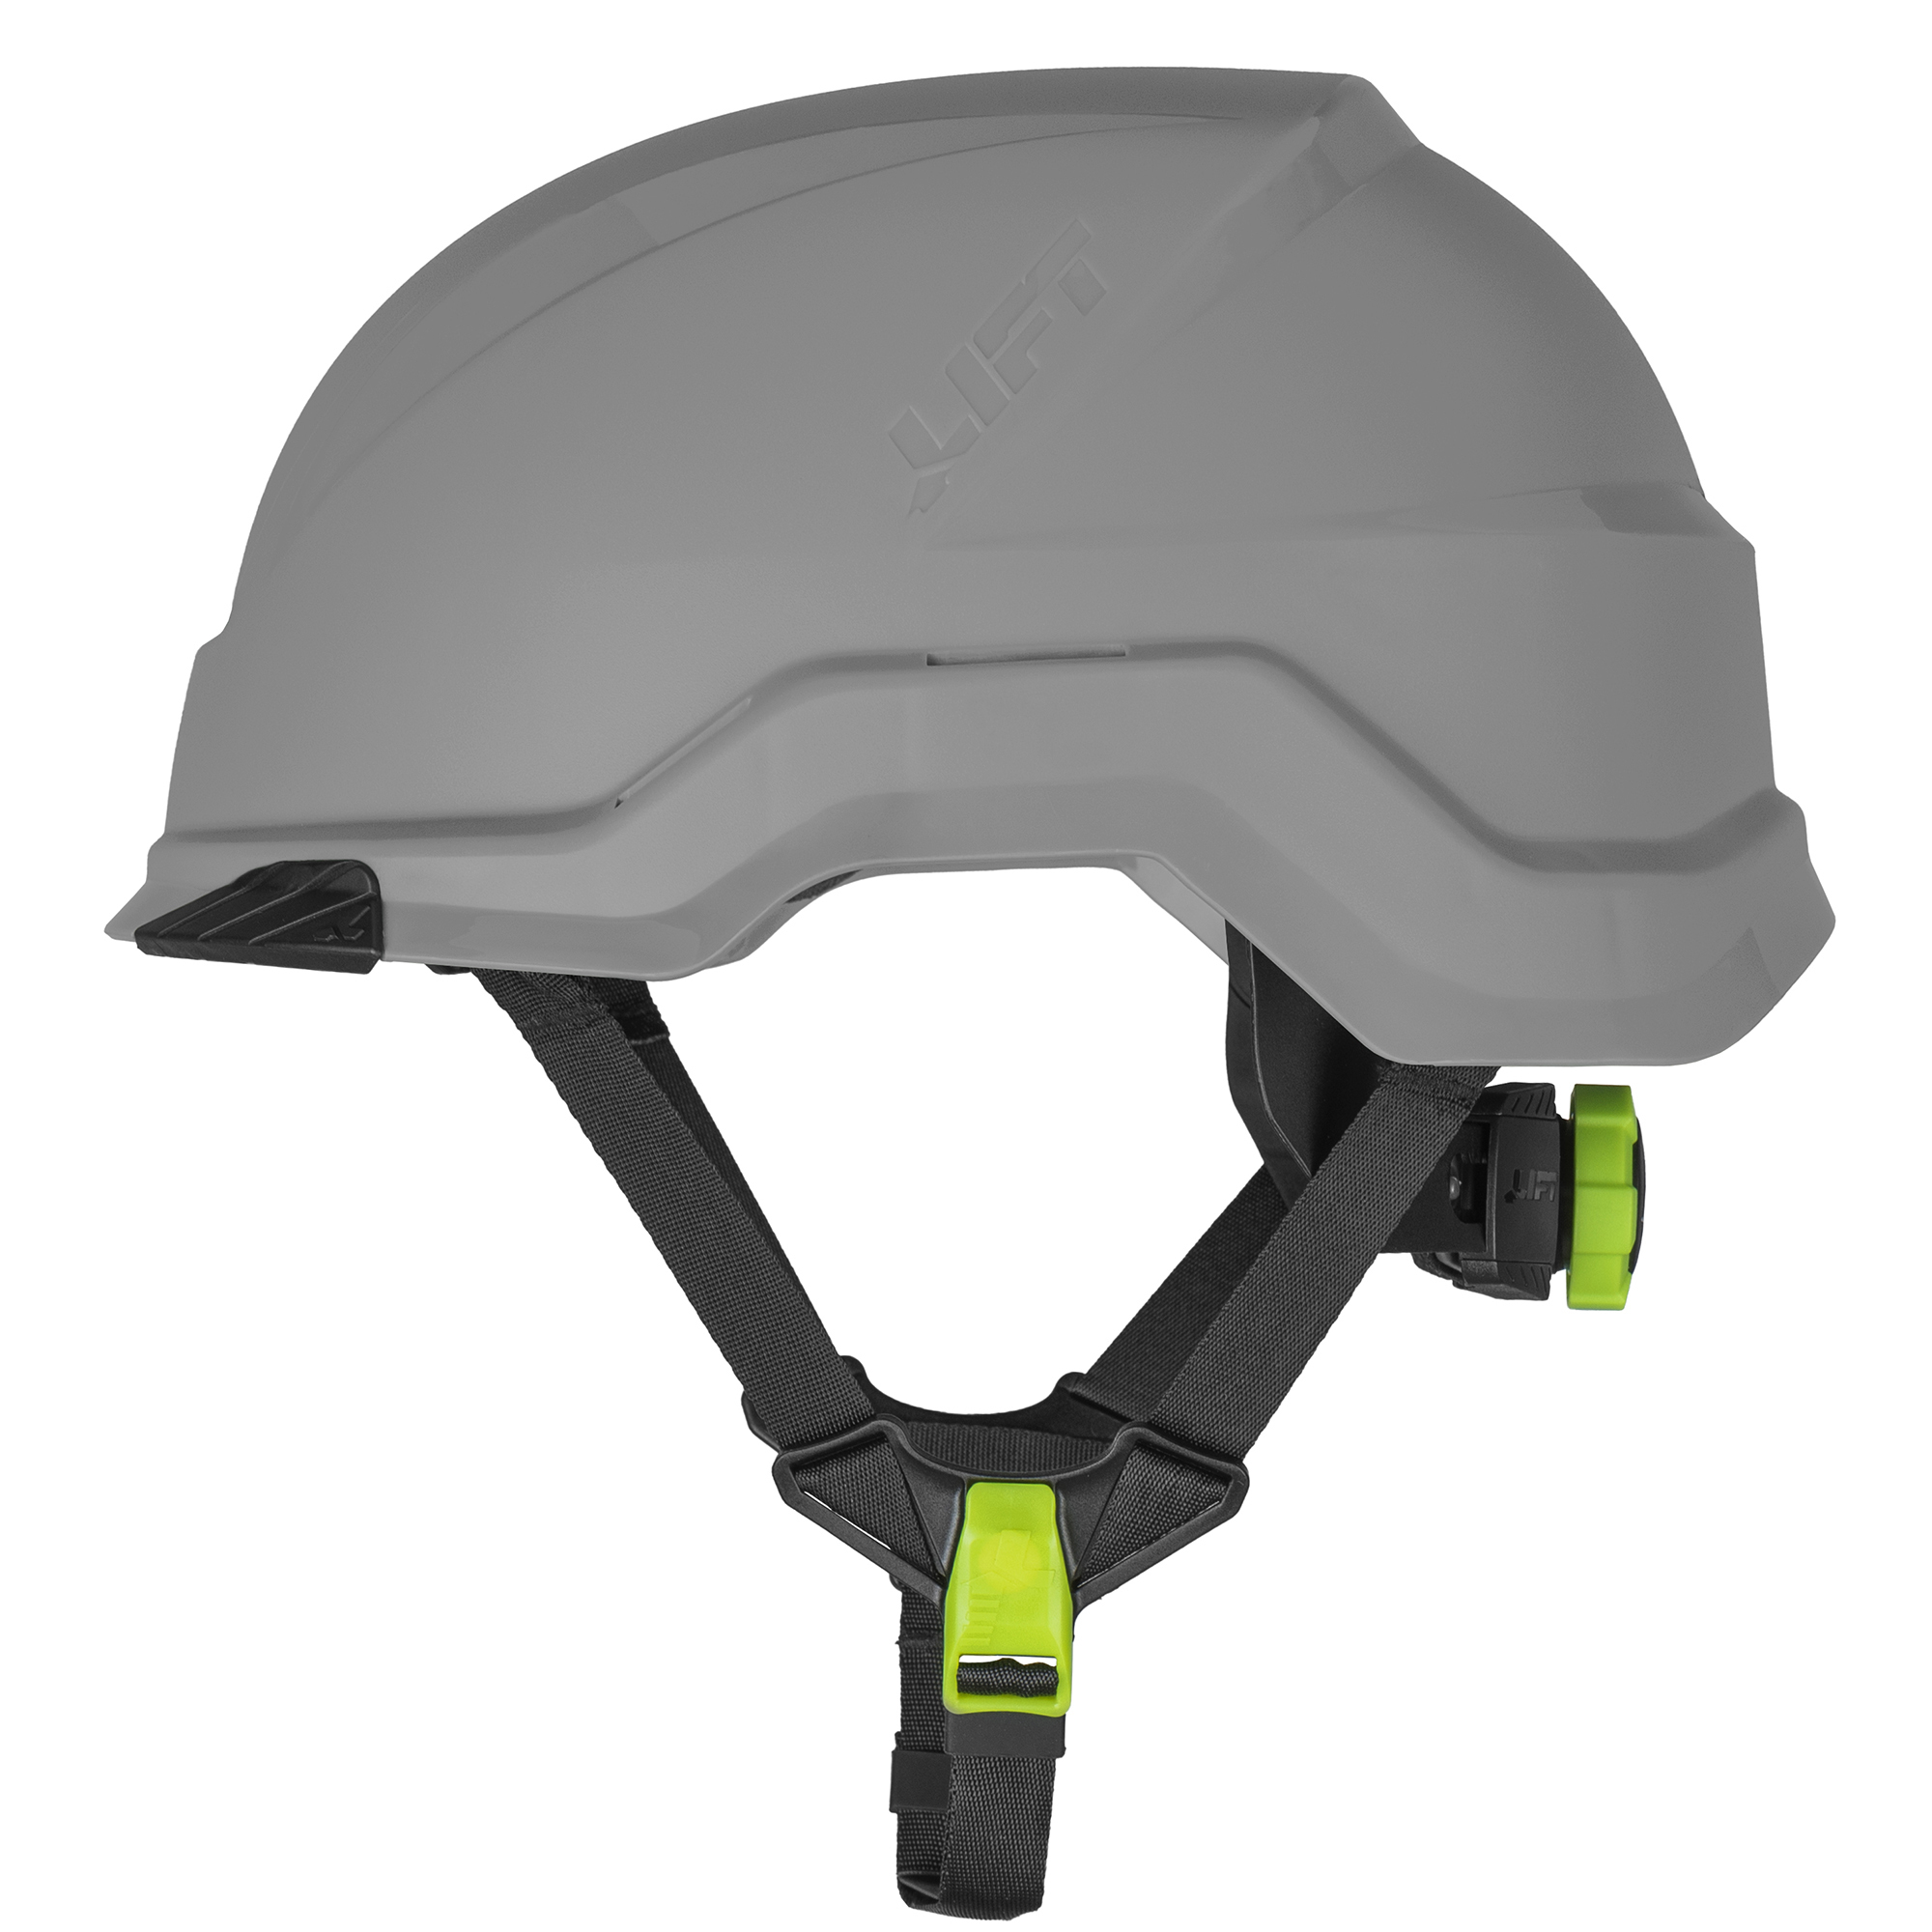 LIFT Safety, RADIX TYPE 2 NON-VENTED (Grey), Hard Hat Style Helmet, Hat Size Adjustable, Color Gray, Model HRX-22YE2